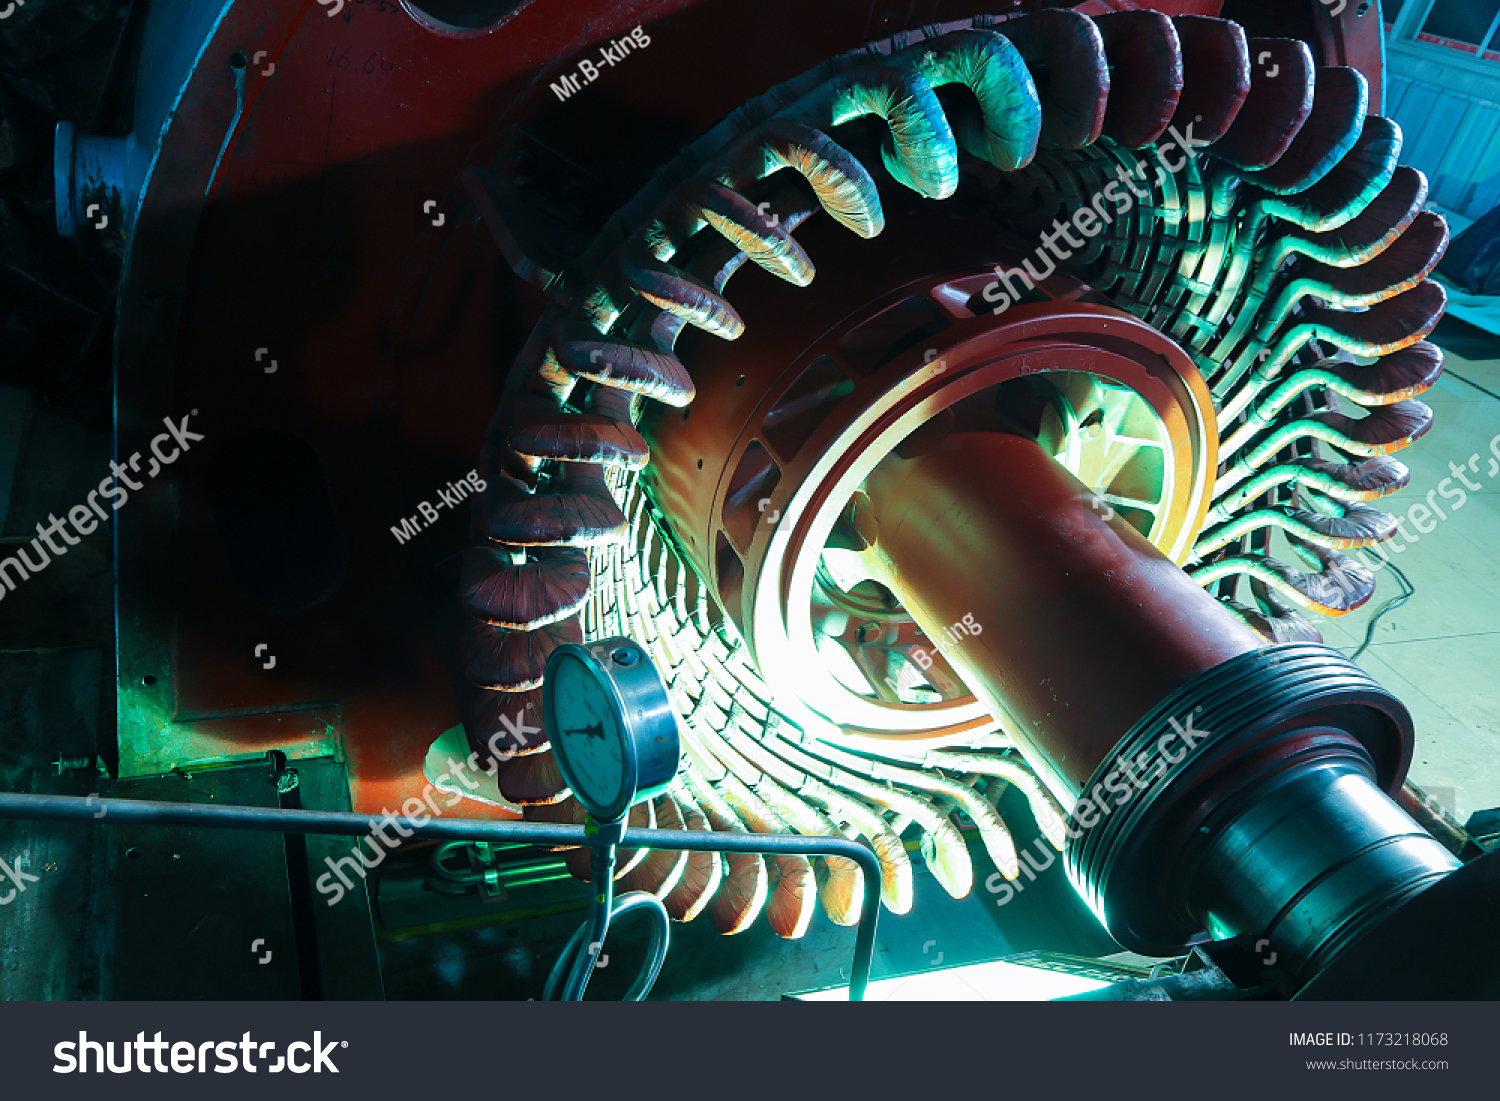 Stator generators of a big electric motor in the coal fired power plant factory manufacturing. #1173218068